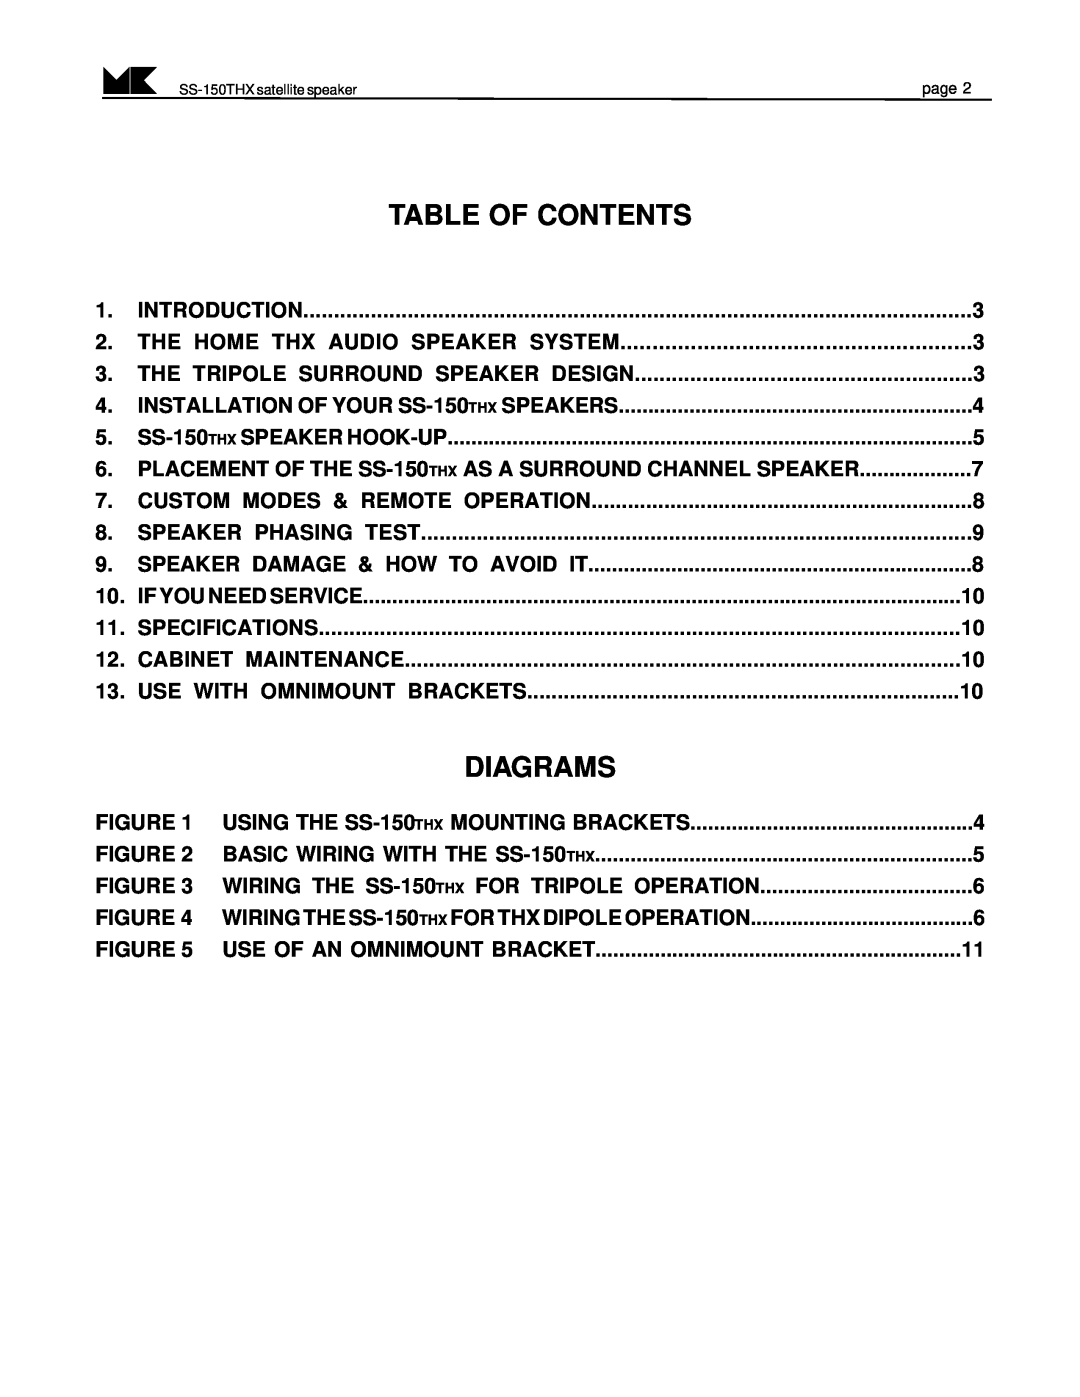 MK Sound SS-150THX operation manual Table Of Contents, Diagrams 